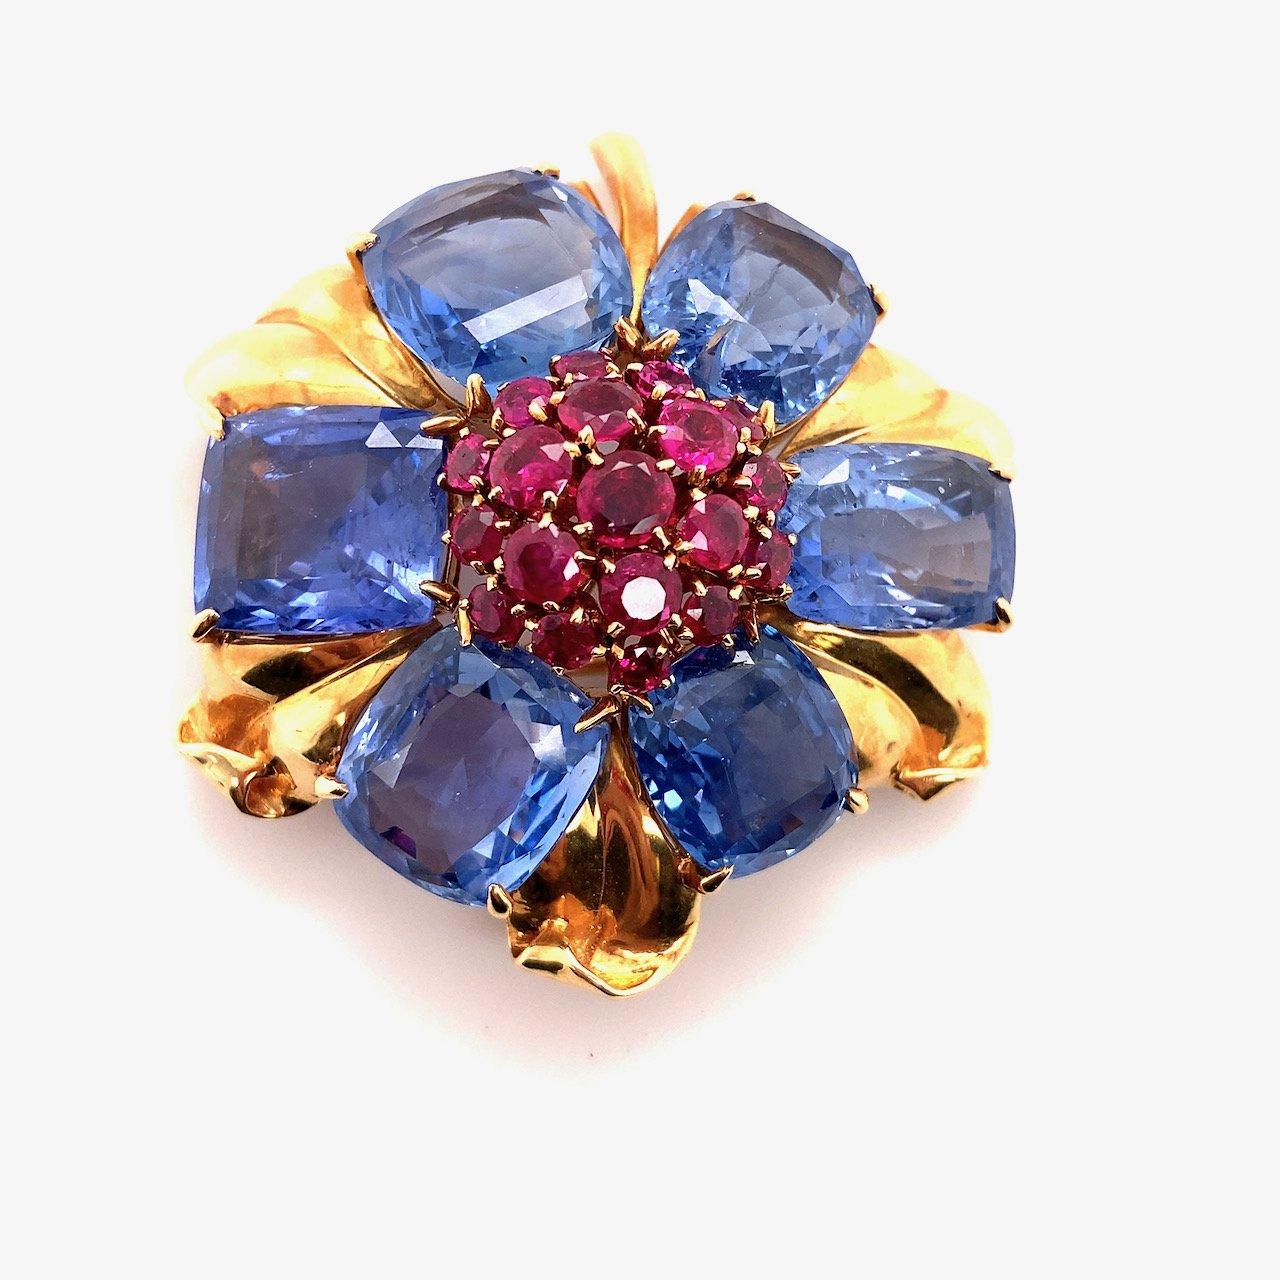 This vintage Van Cleef & Arpels floral motif brooch dates from the Retro era of the 1940’s. The brooch is signed 'VCA' and includes a Guild Laboratories certificate. This stunning brooch is crafted in 18KT yellow gold and features six natural